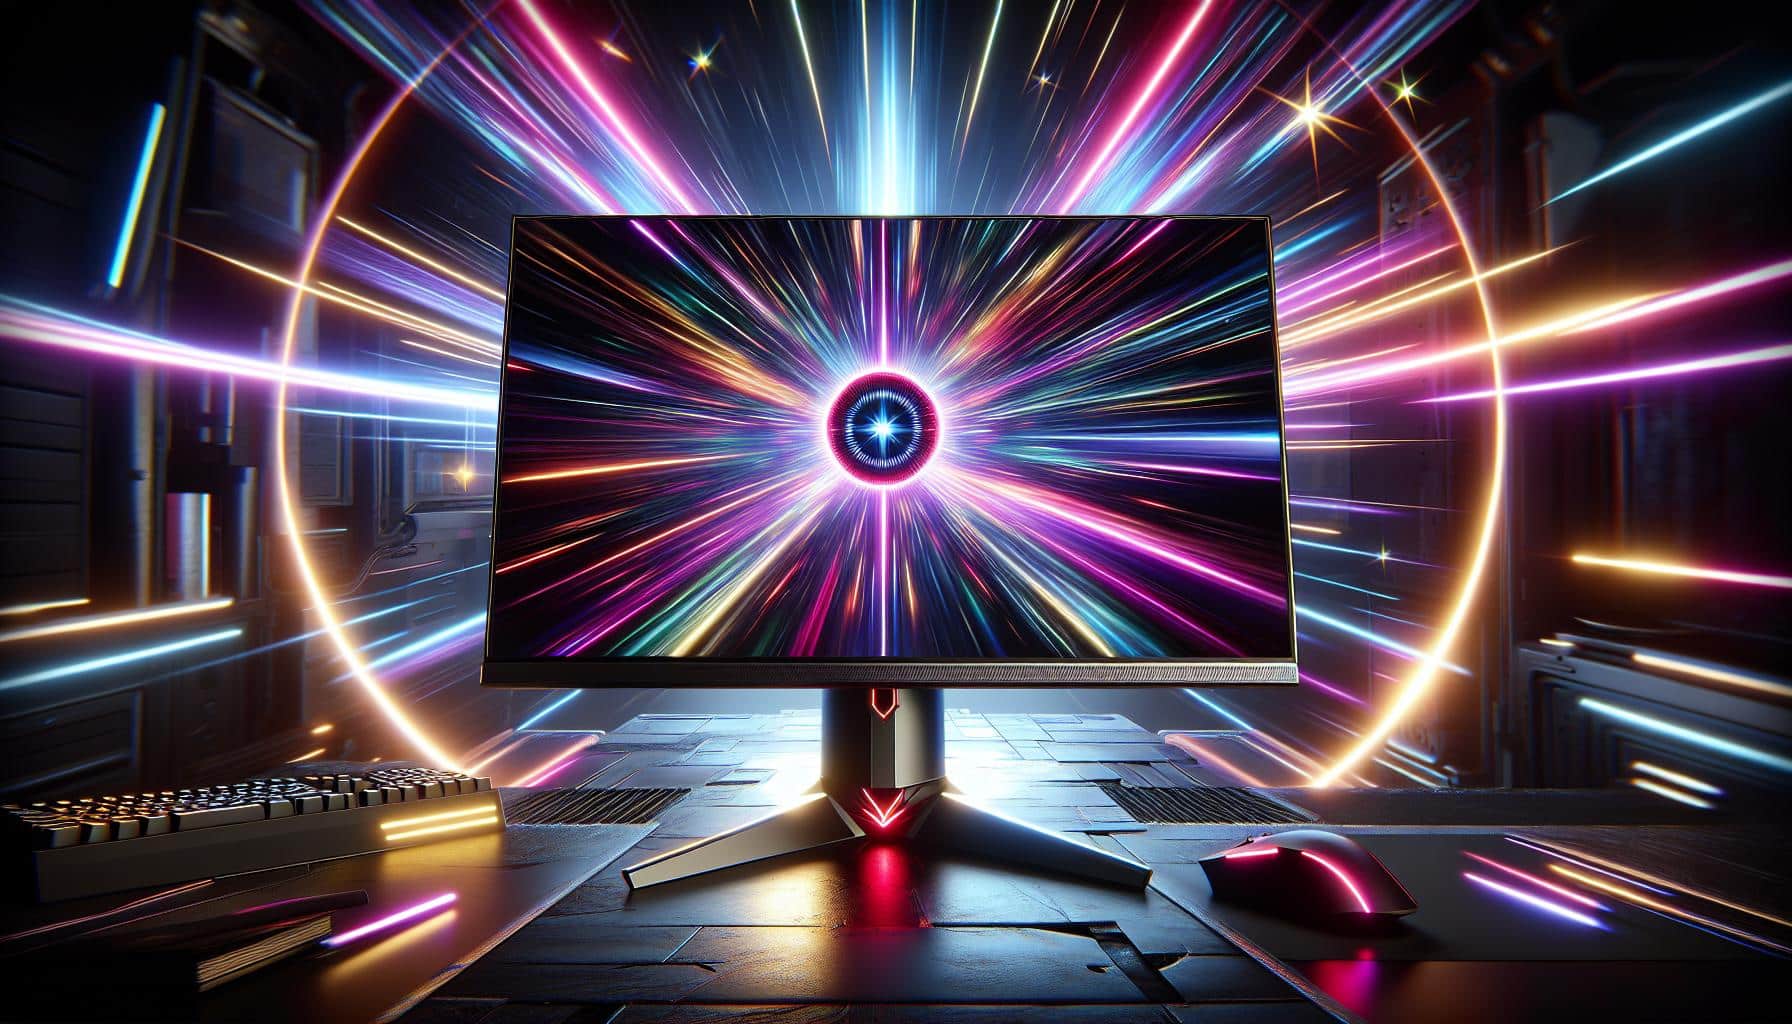 240Hz QHD LG Gaming Monitor: Save 0 on this High-Performance Display | FinOracle